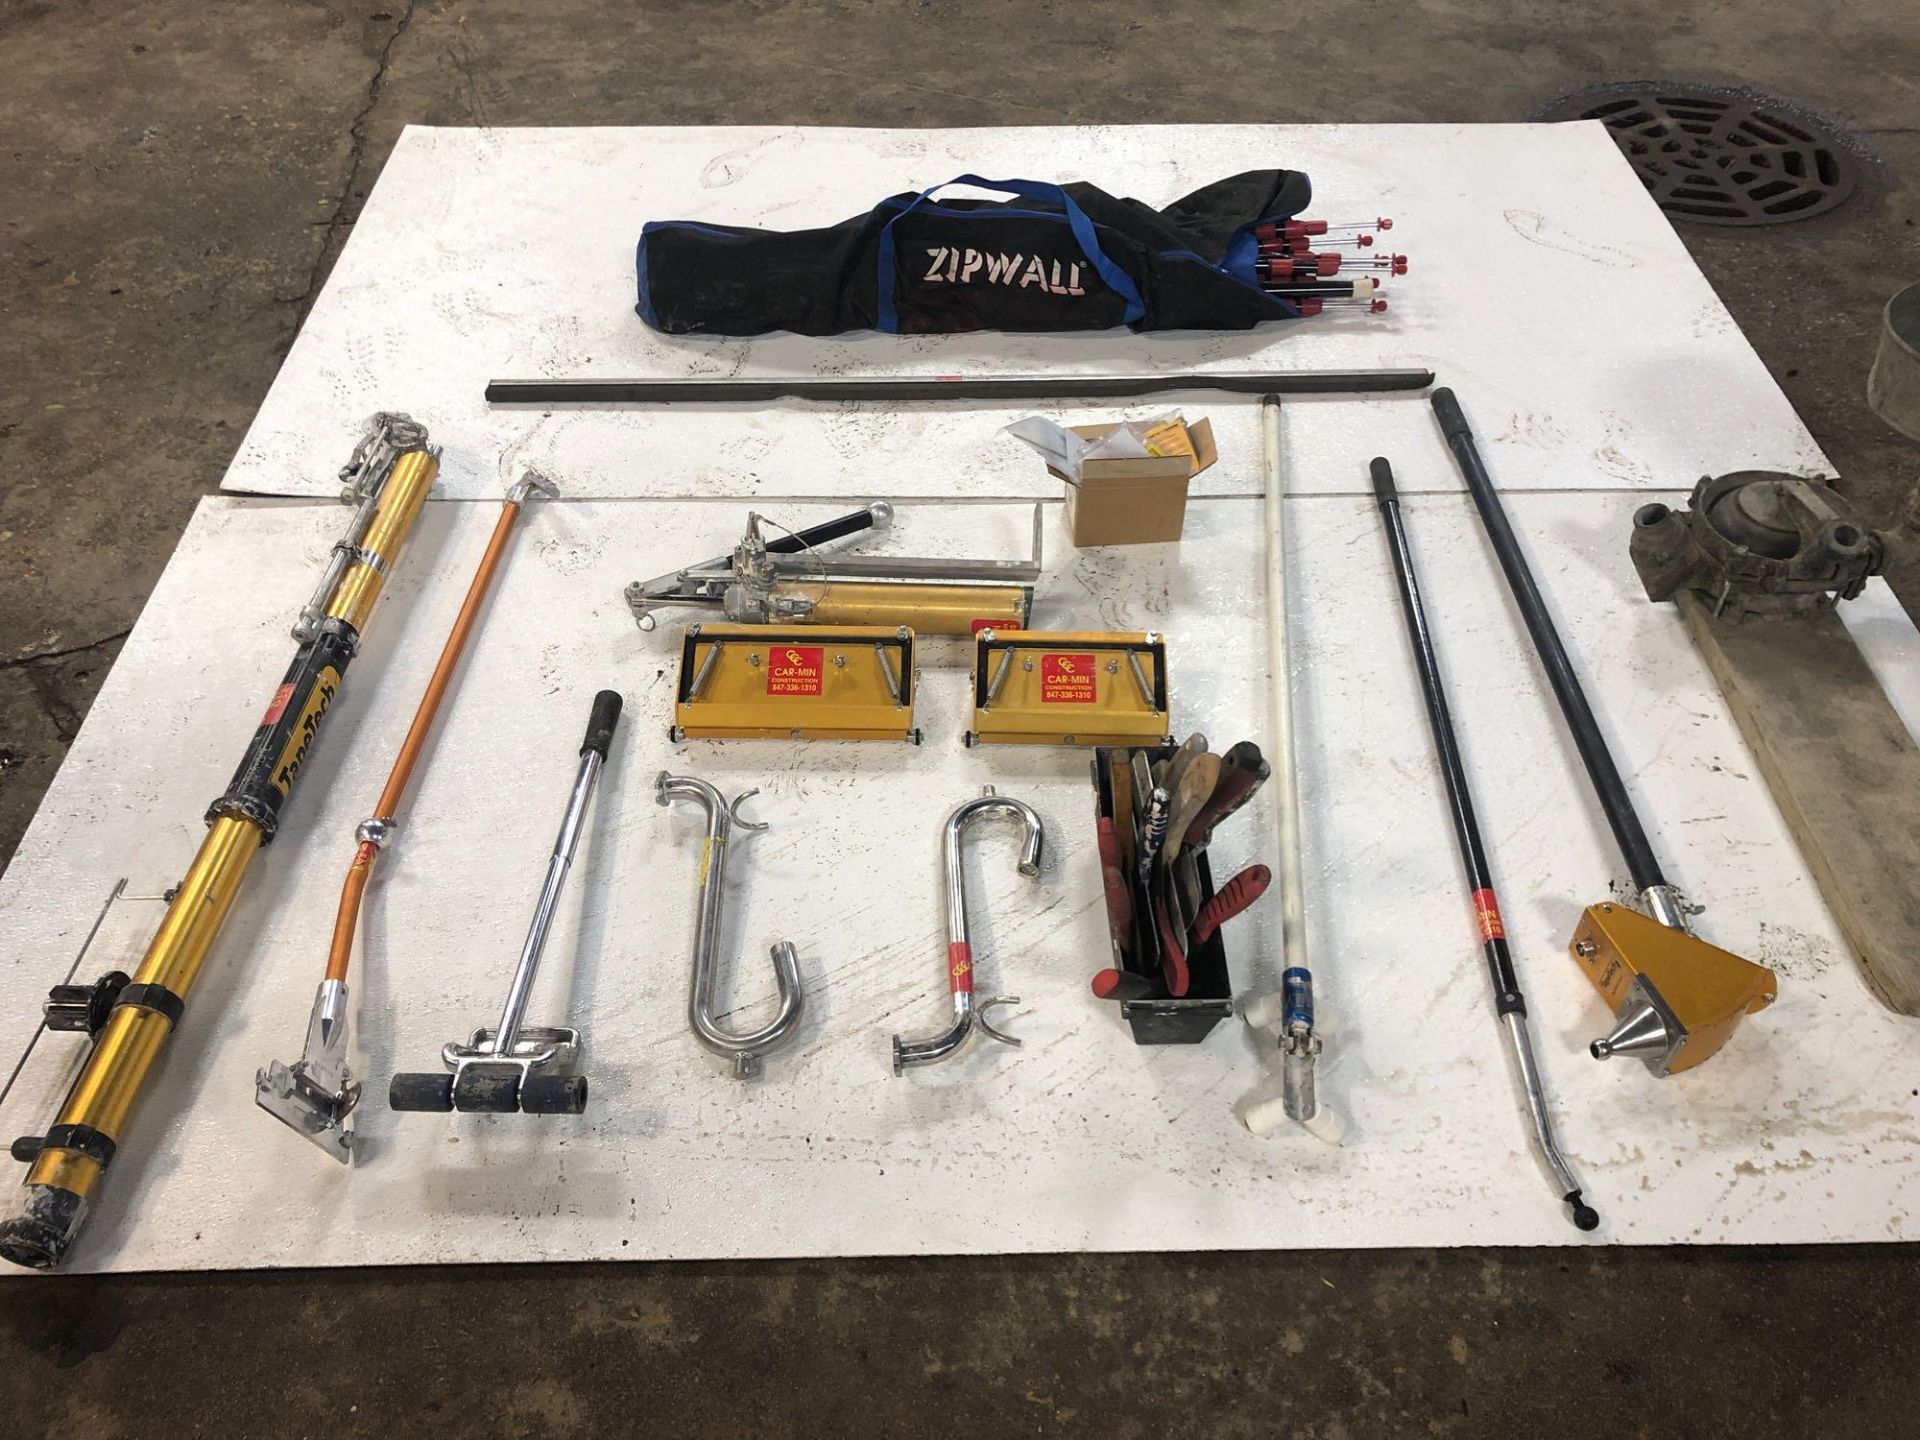 Tape Tech System Taping Tools, Zip Wall System Dust Enclosure & Grout Pump